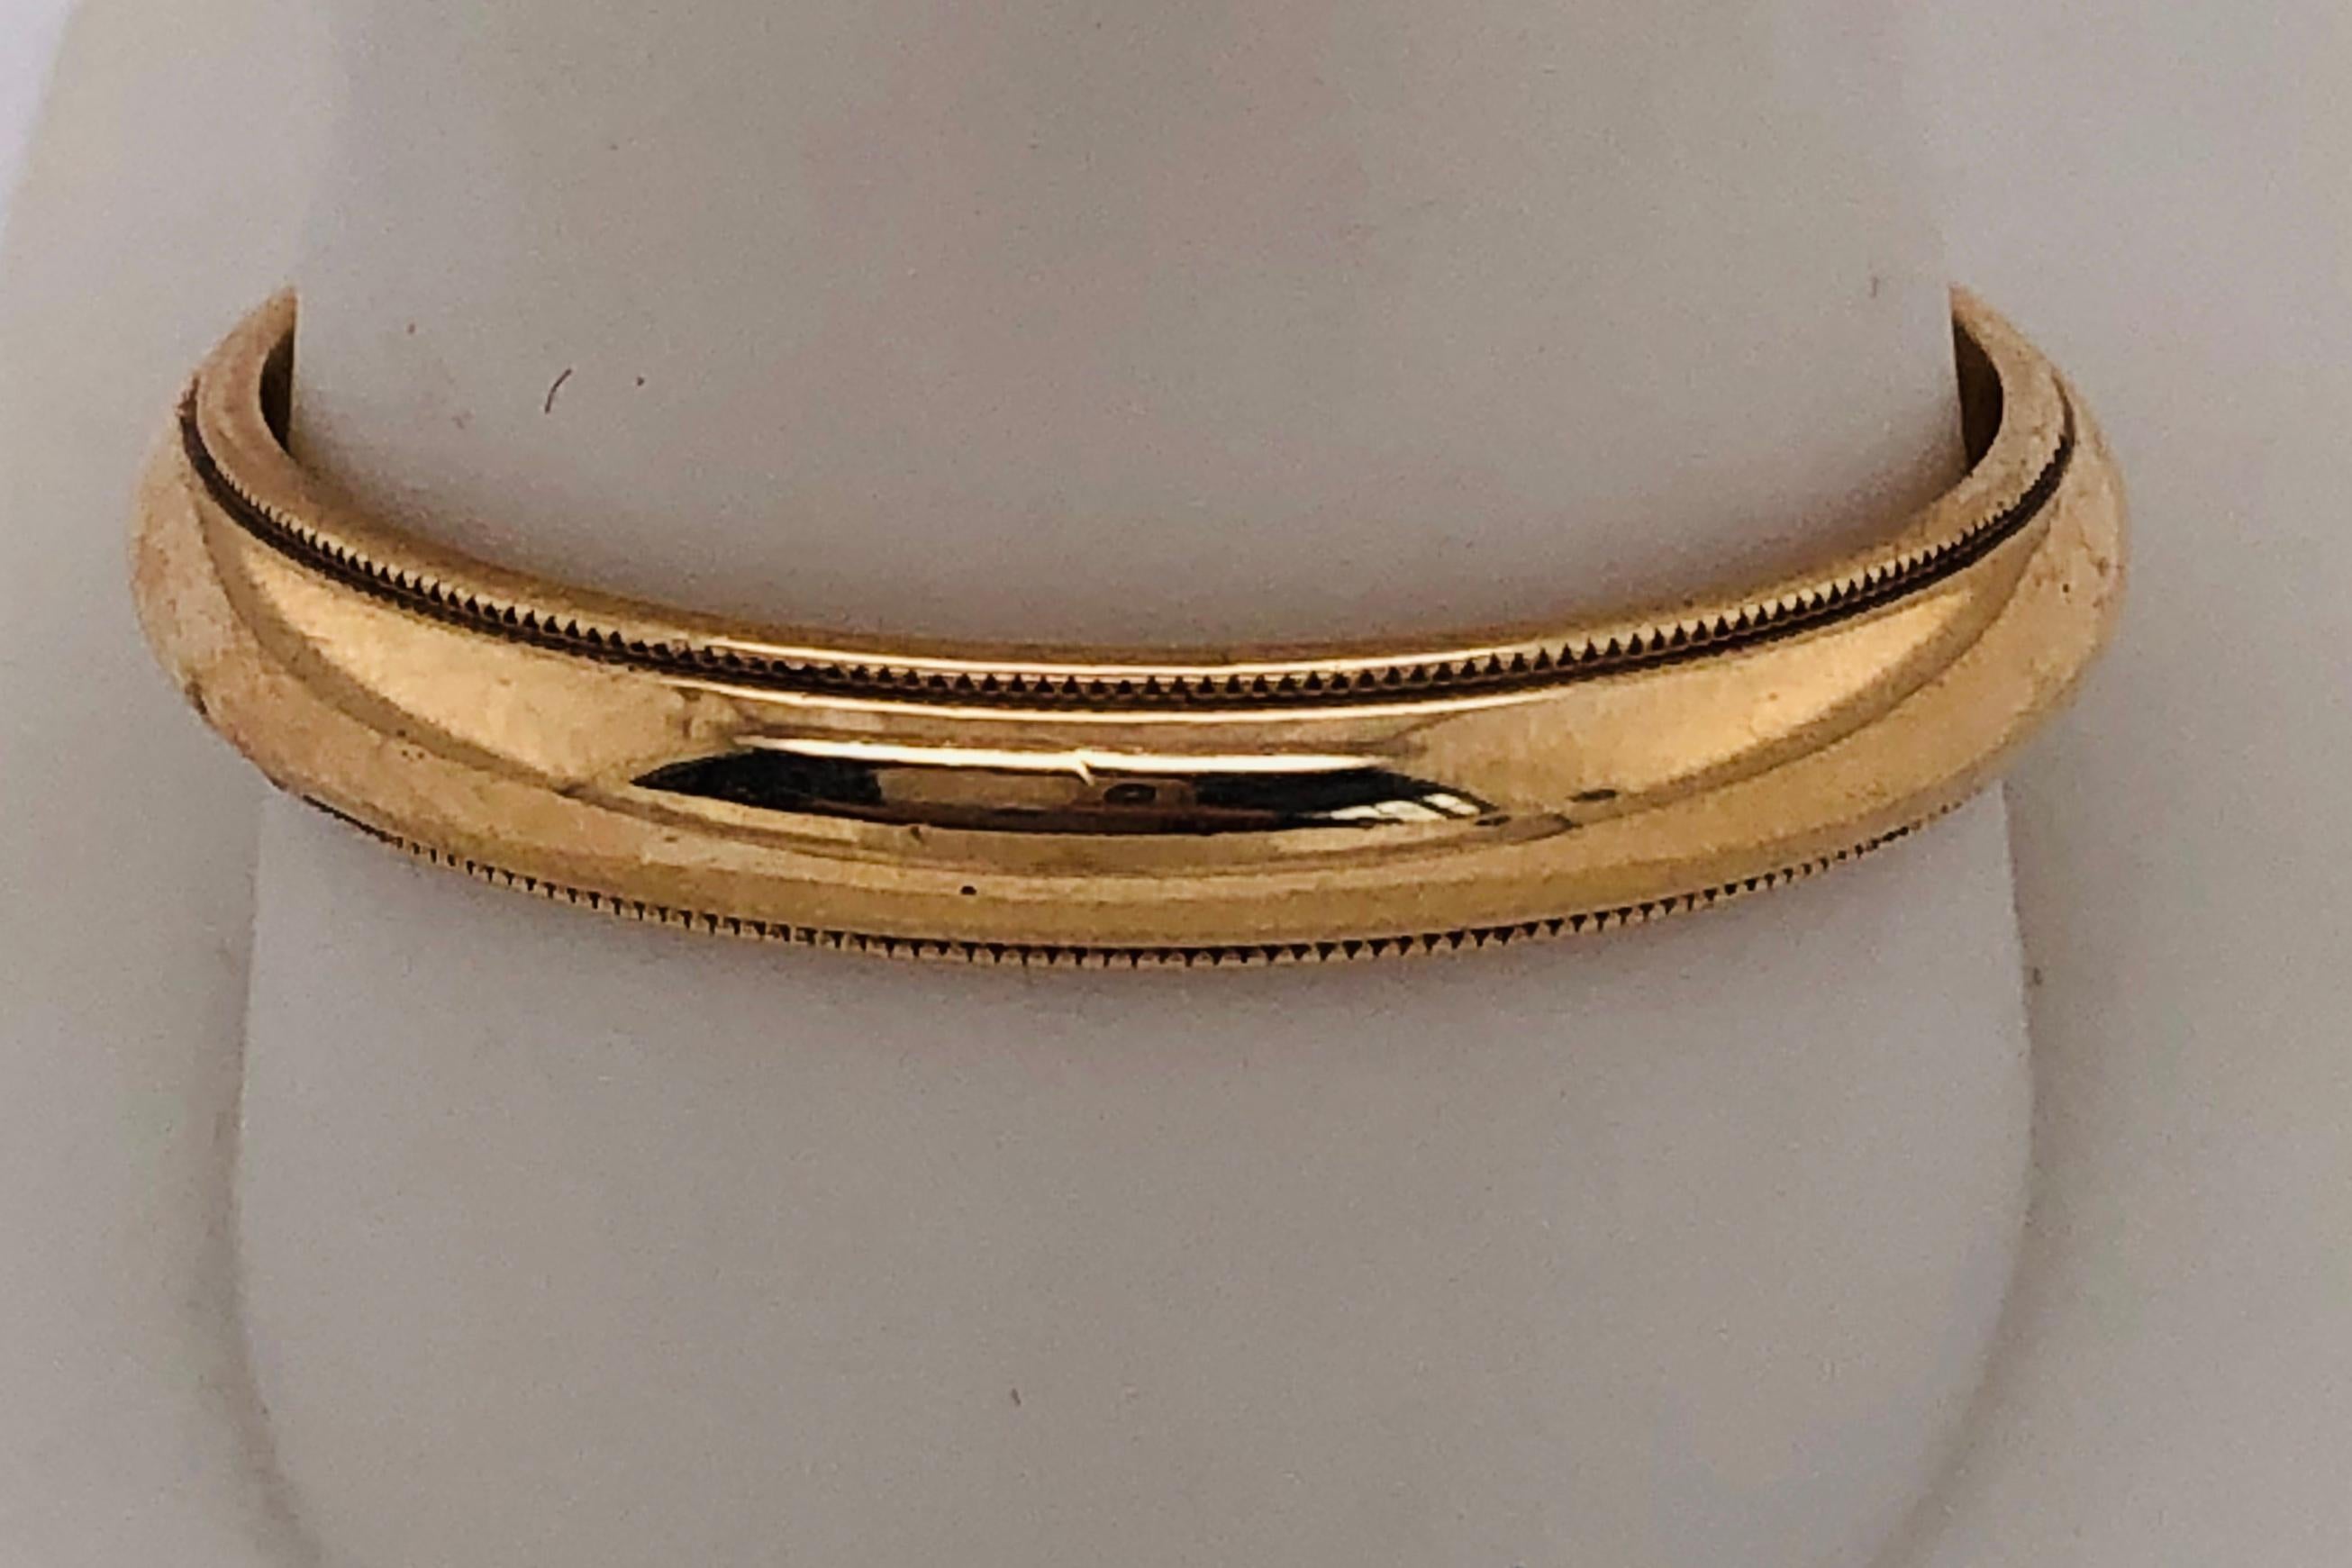 14Kt Yellow Gold Band/Wedding Ring
Size 11.5 with 4.40 grams total weight.

